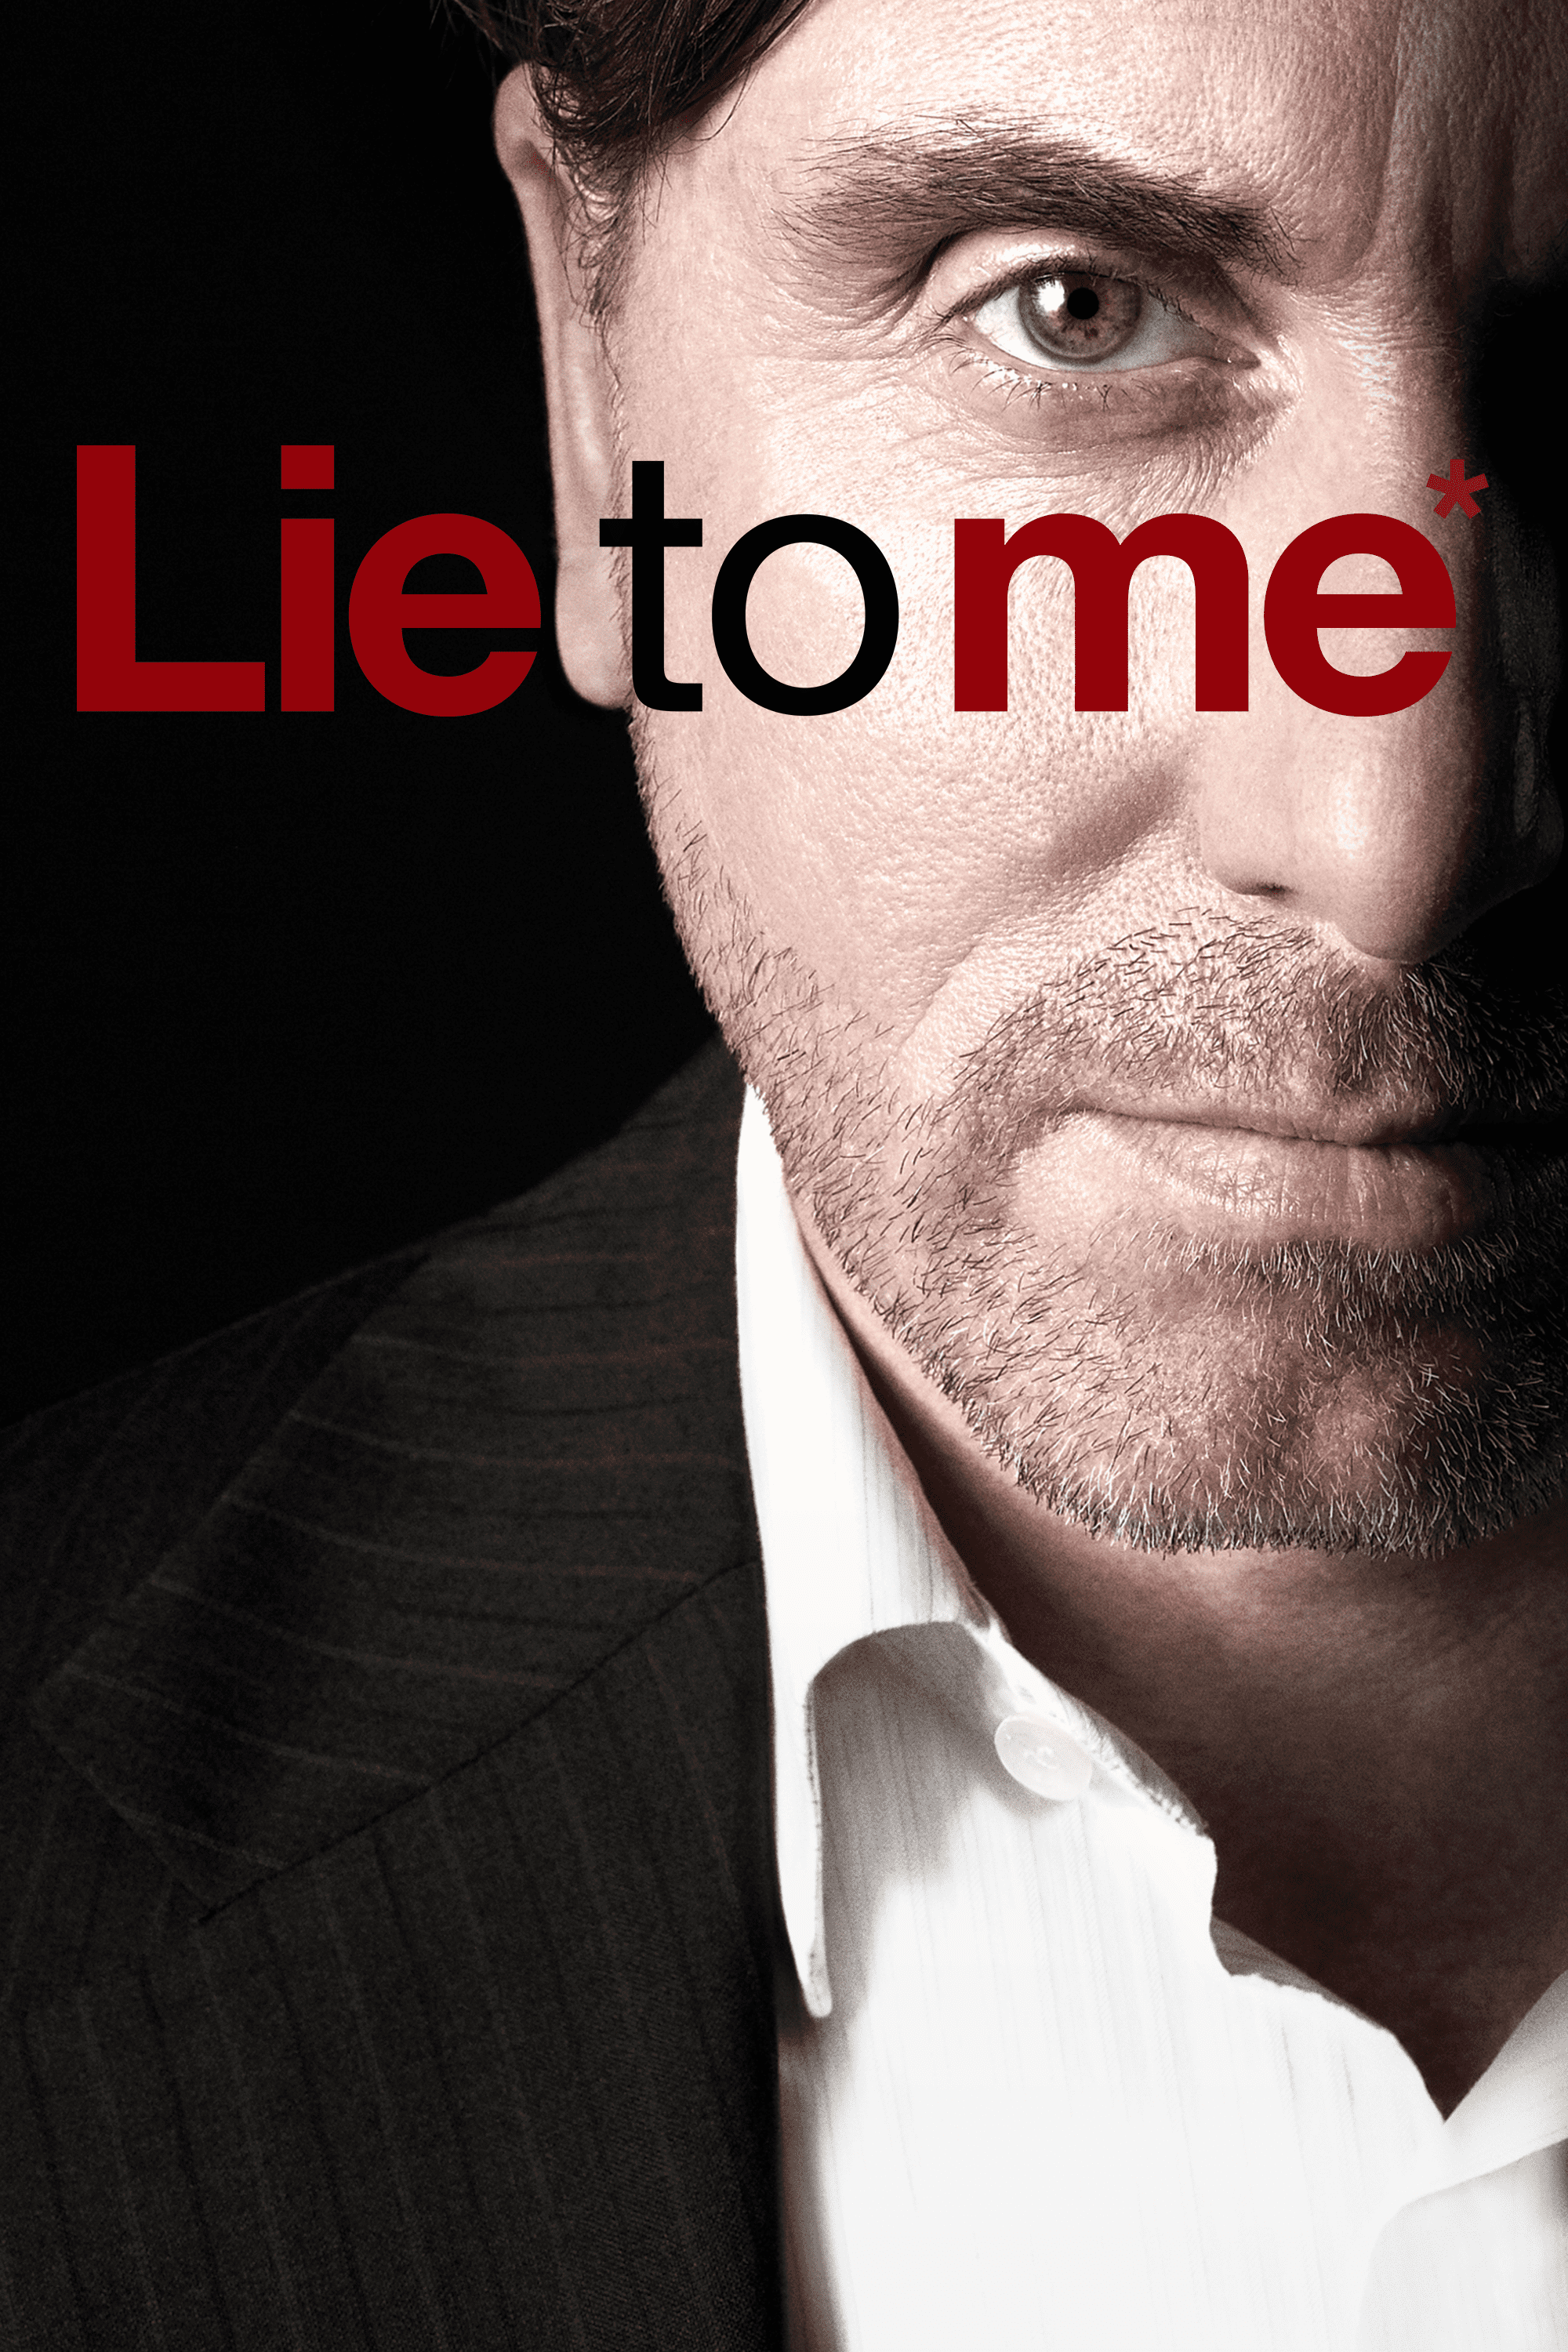 Lie With Me Full Movie Online Free